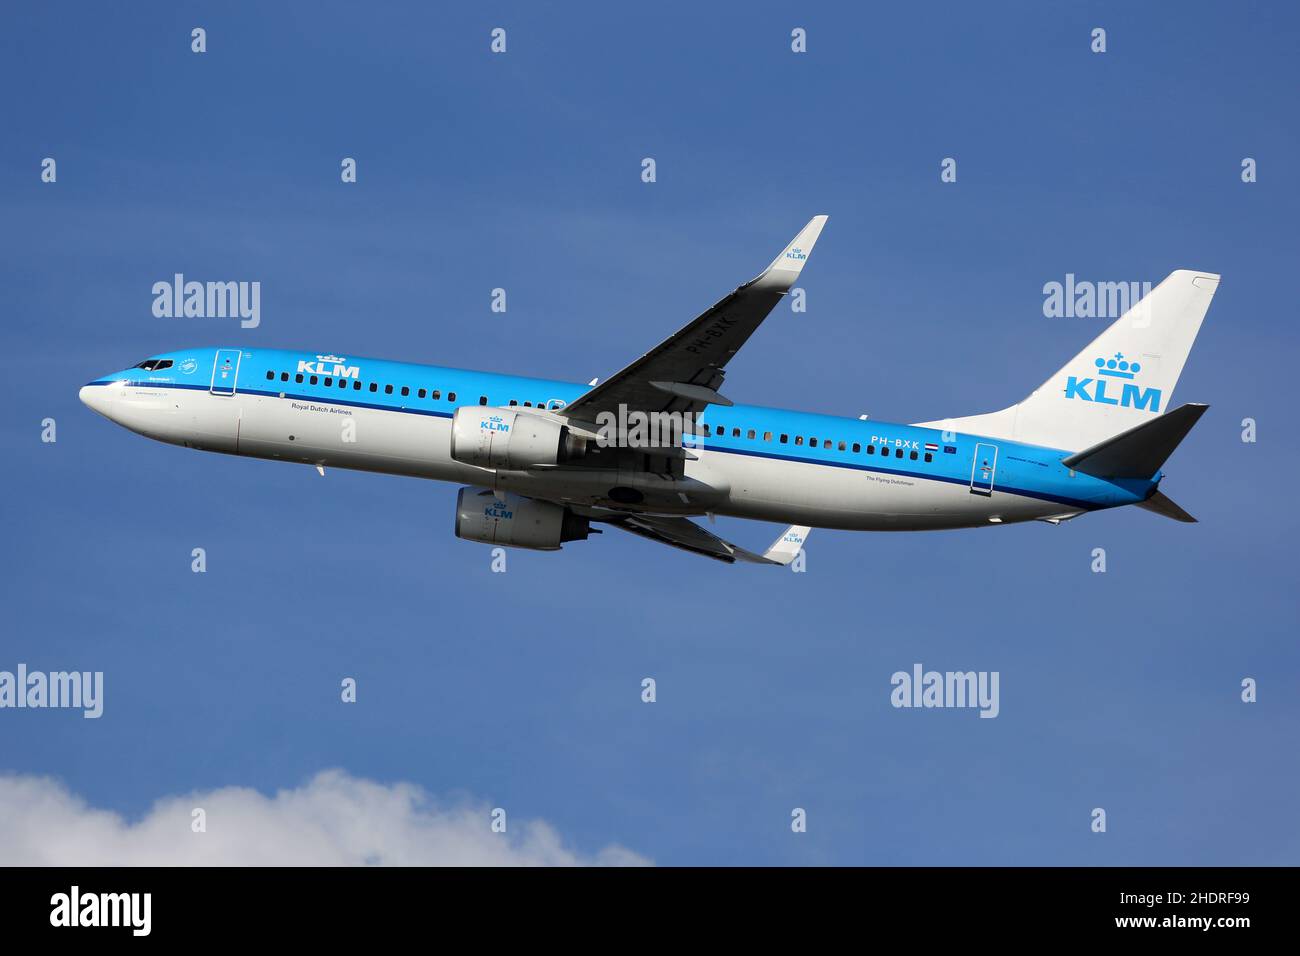 commercial airplane, royal dutch airlines, commercial airplanes, plane Stock Photo